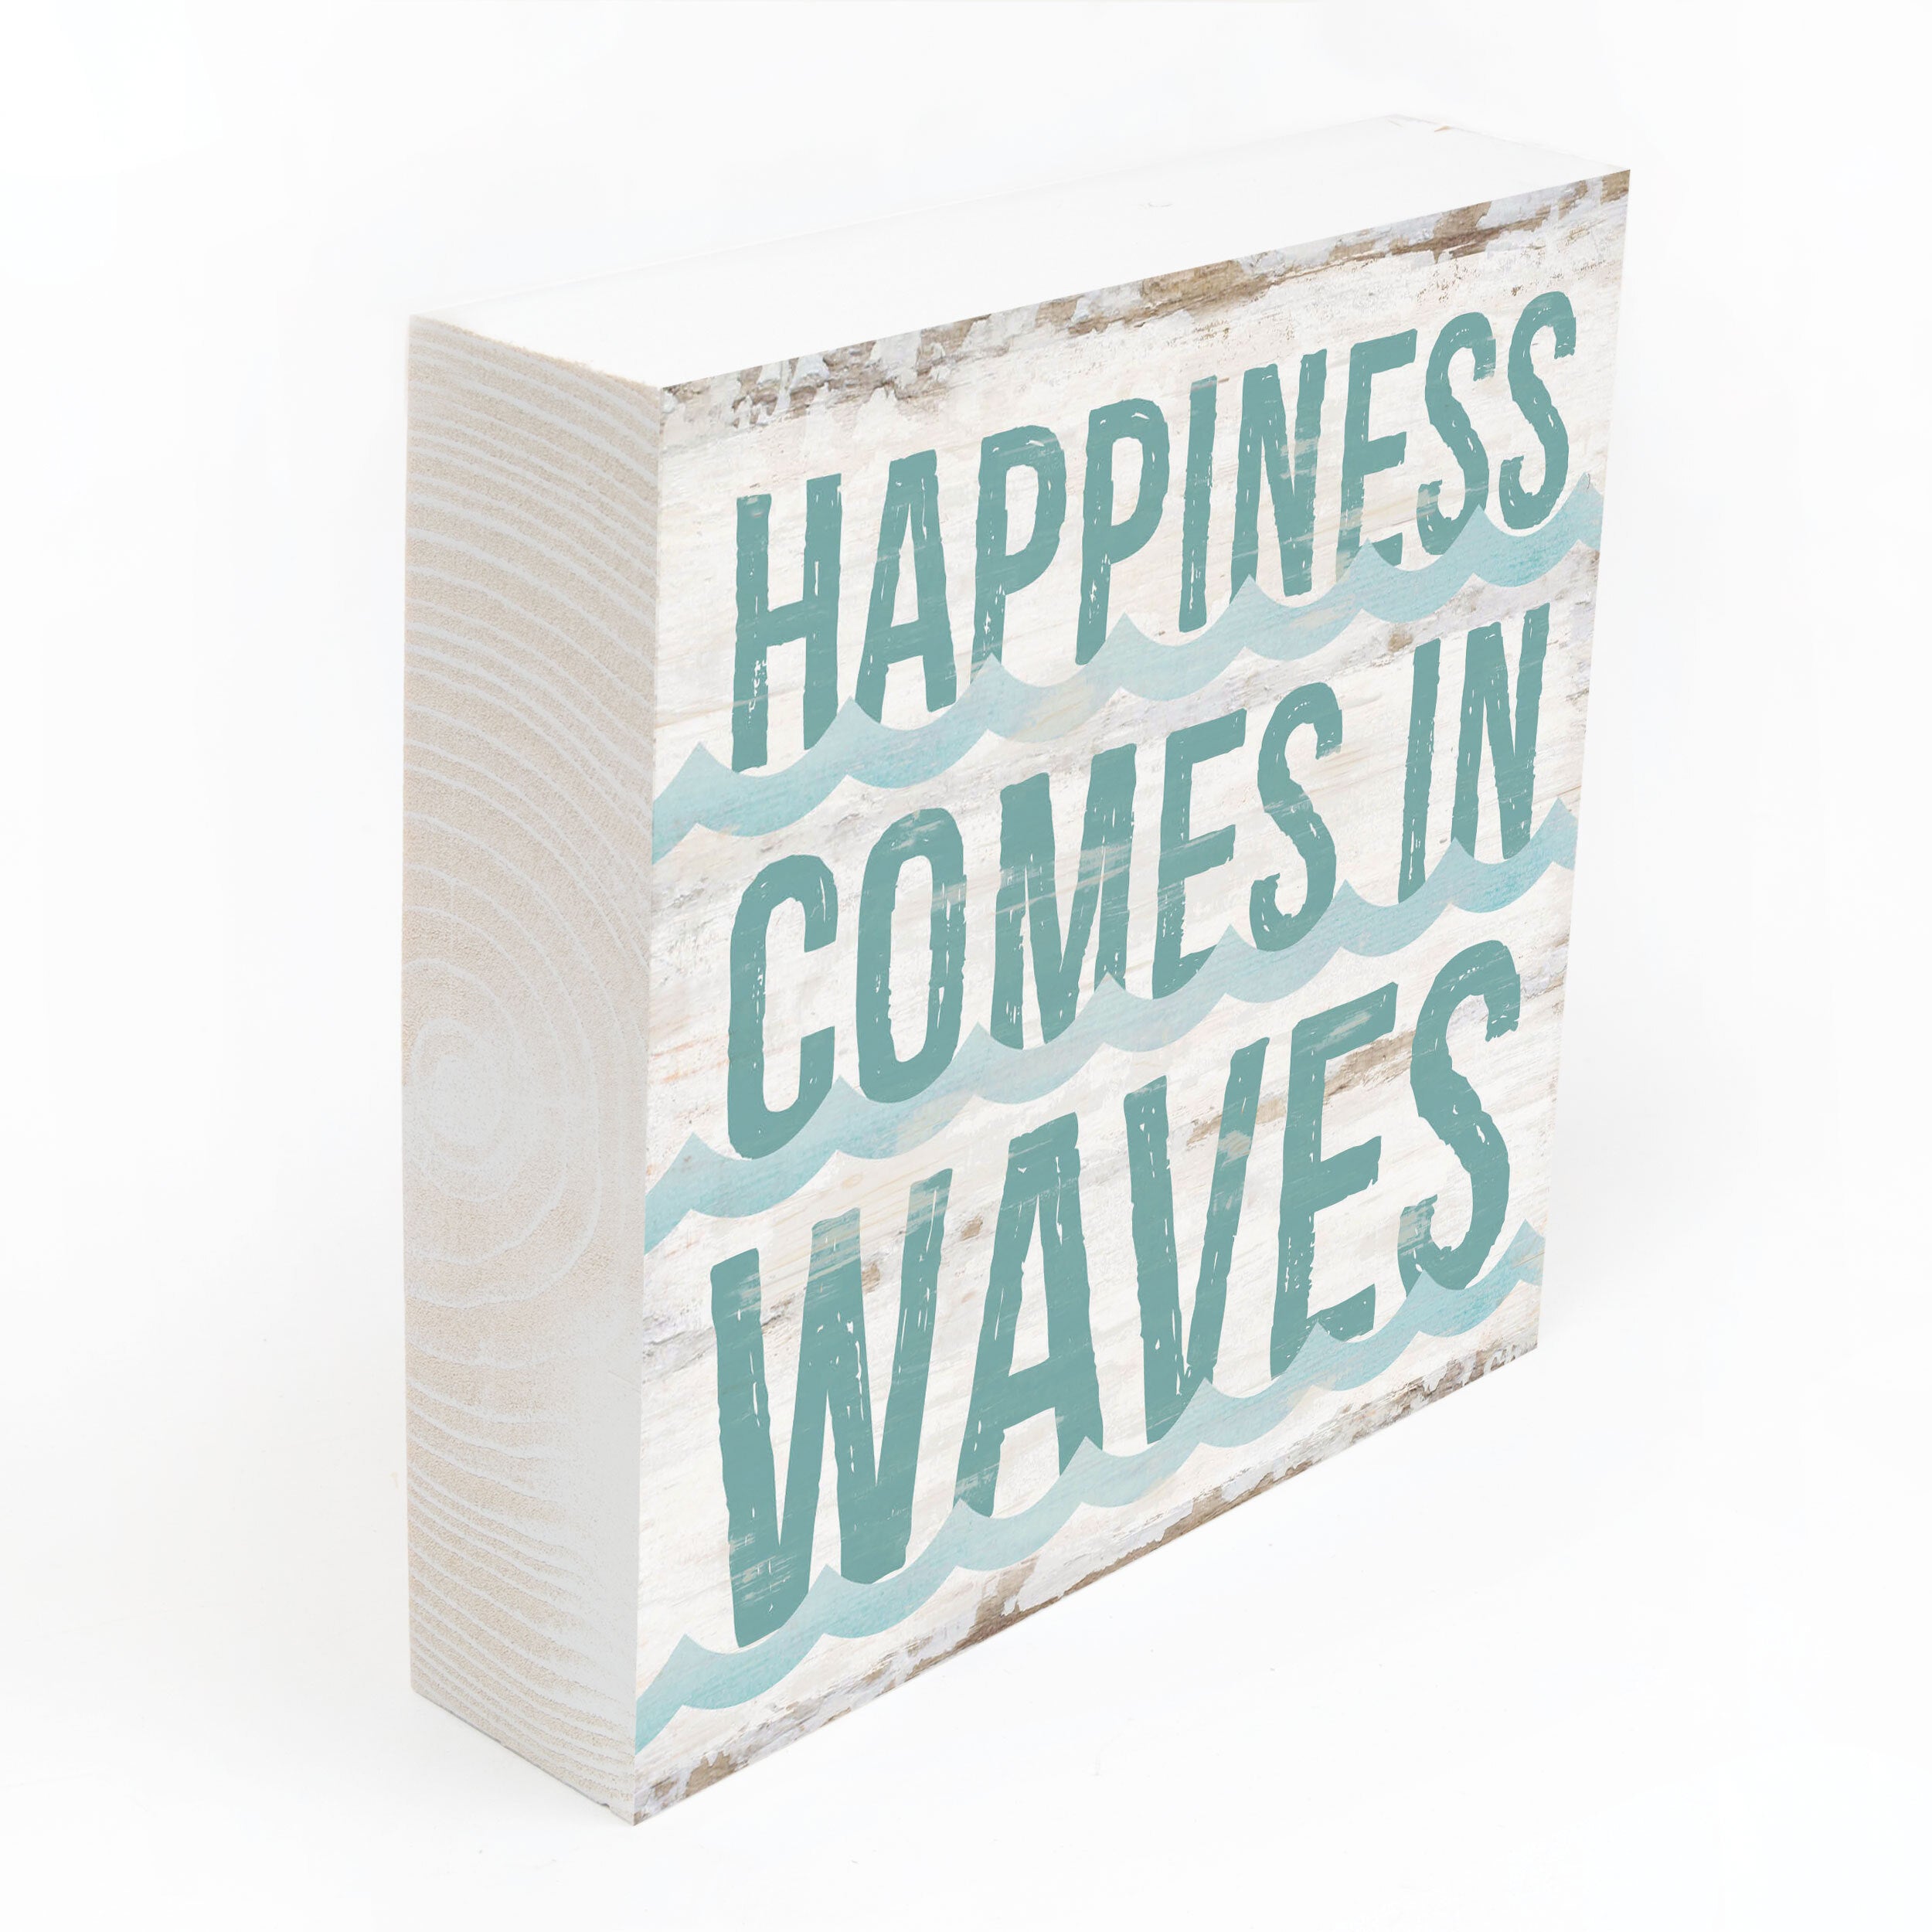 Happiness Comes In Waves Wood Block Décor